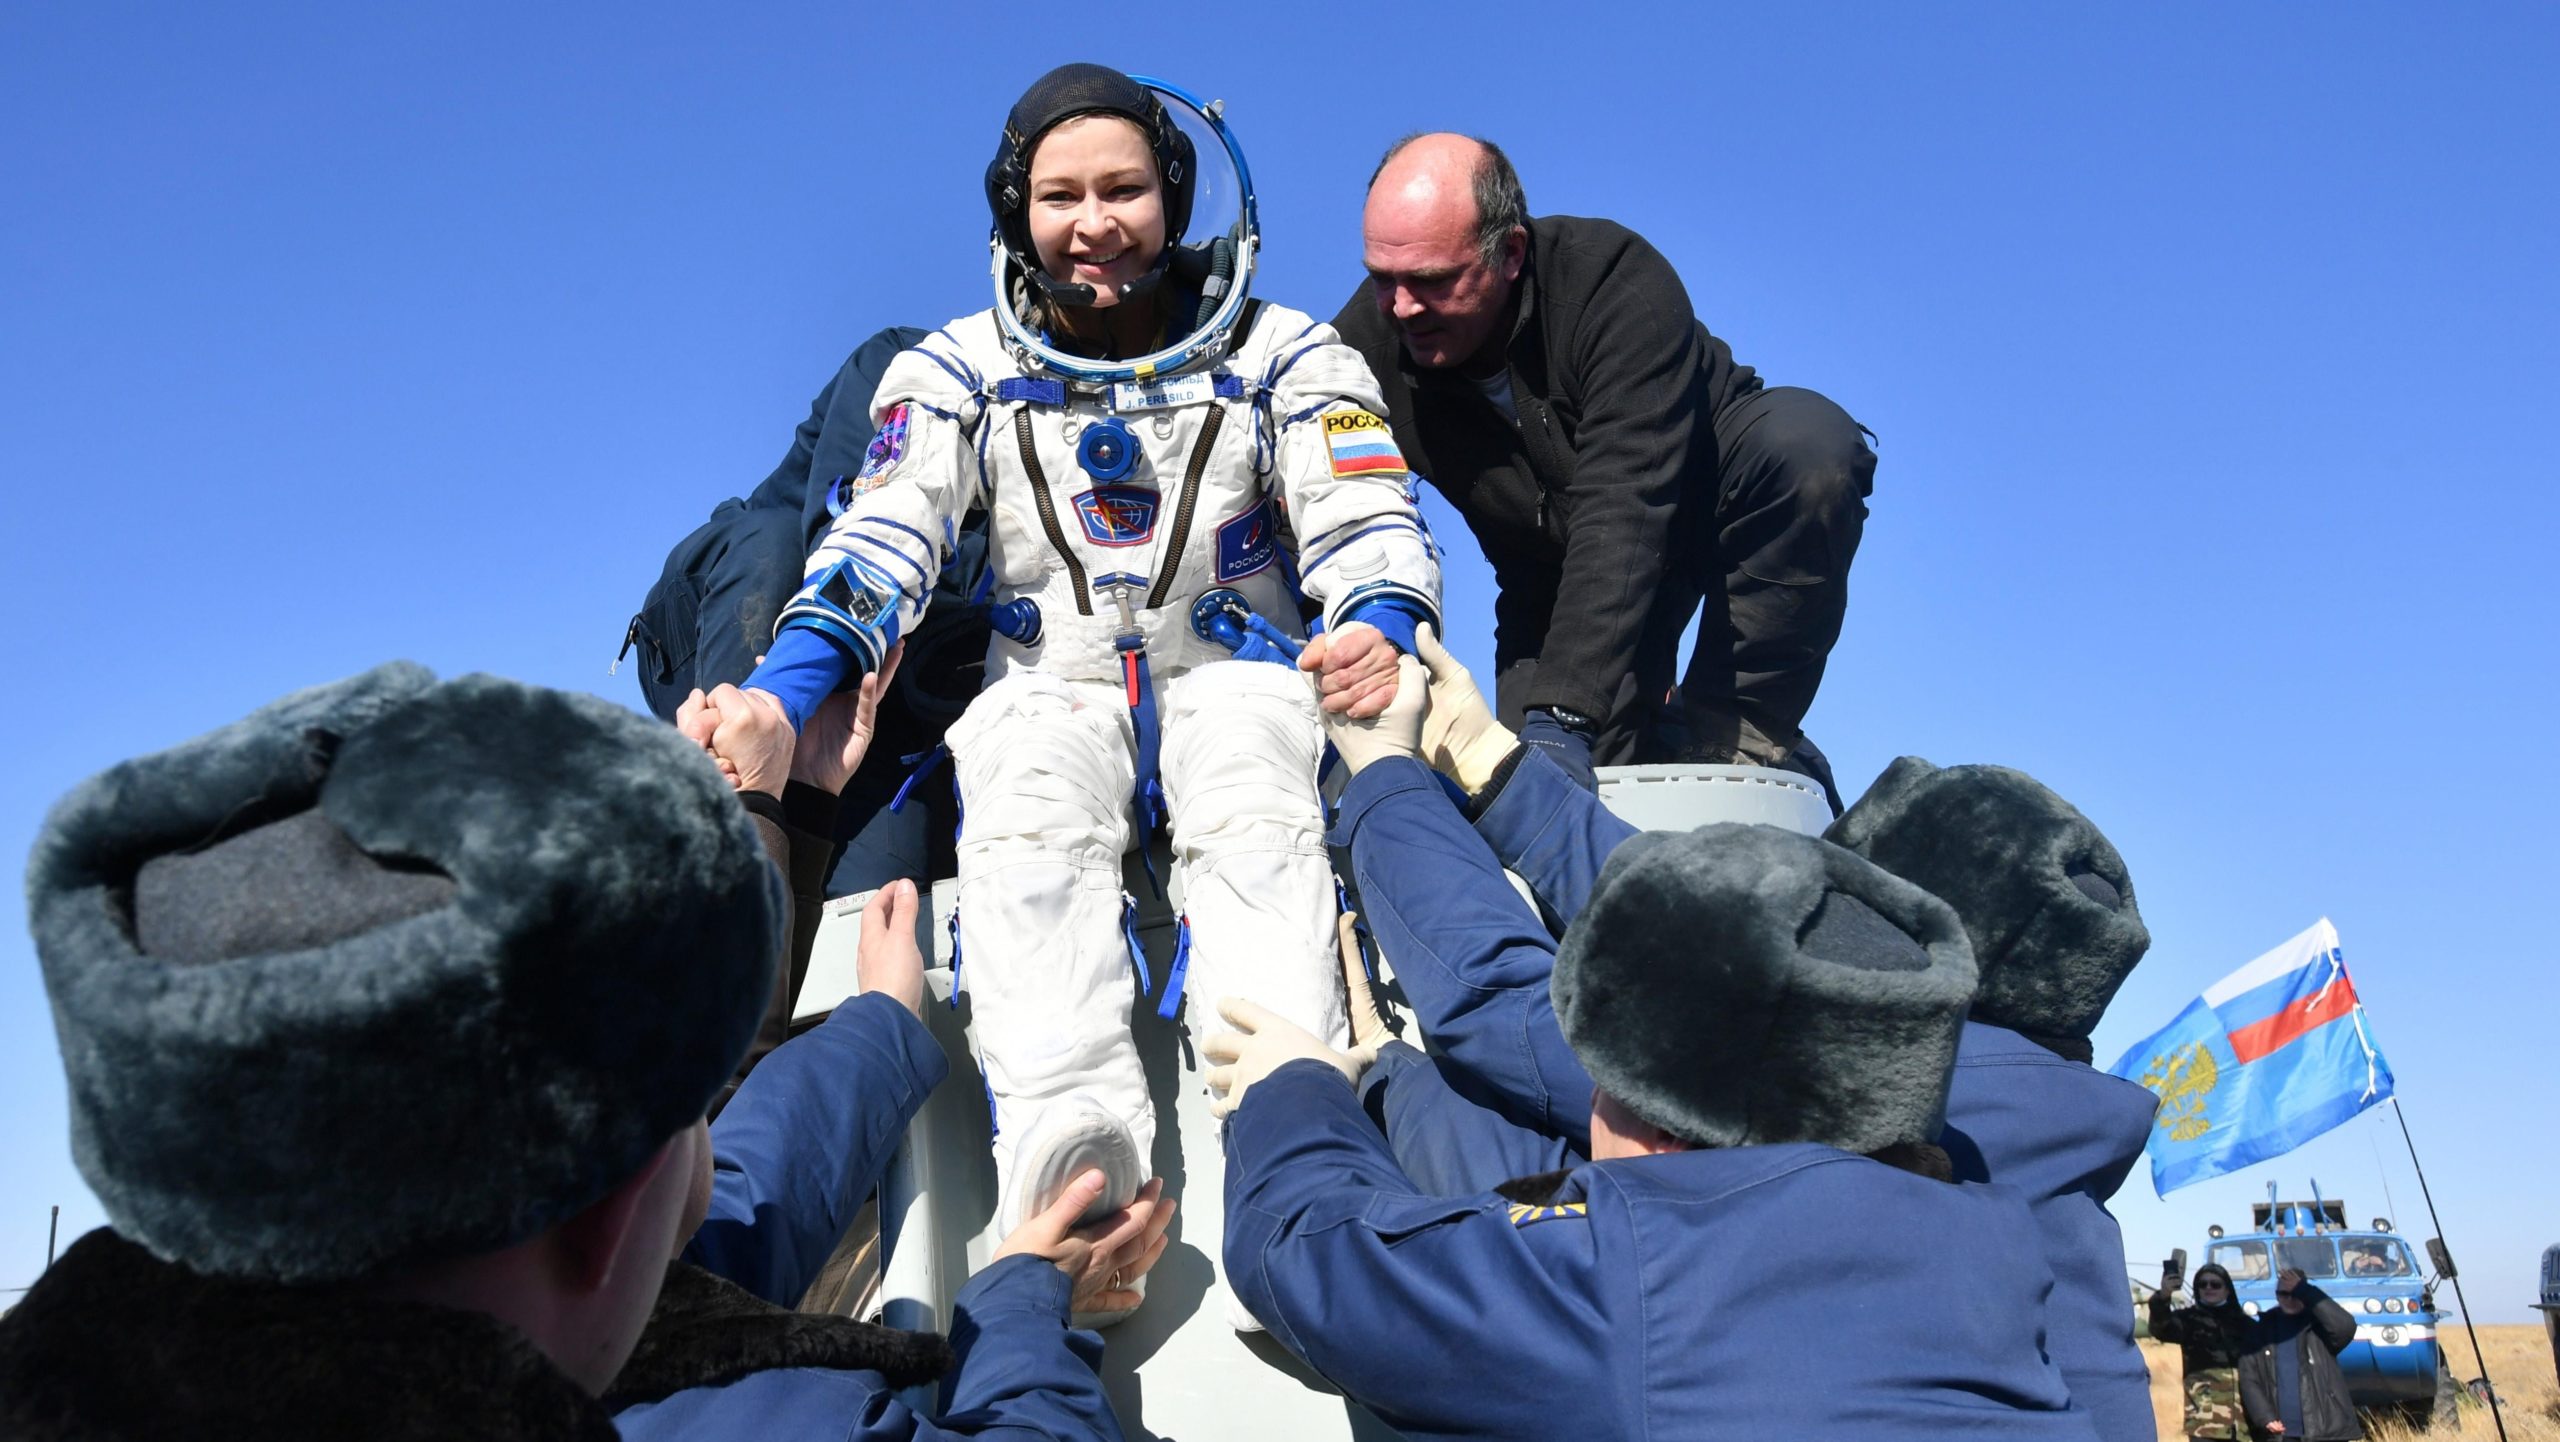 Russian space agency rescue team members help actress Yulia Peresild out from the capsule shortly after the landing of the Russian Soyuz MS-18 space capsule. (Photo: Roscosmos Space Agency, AP)